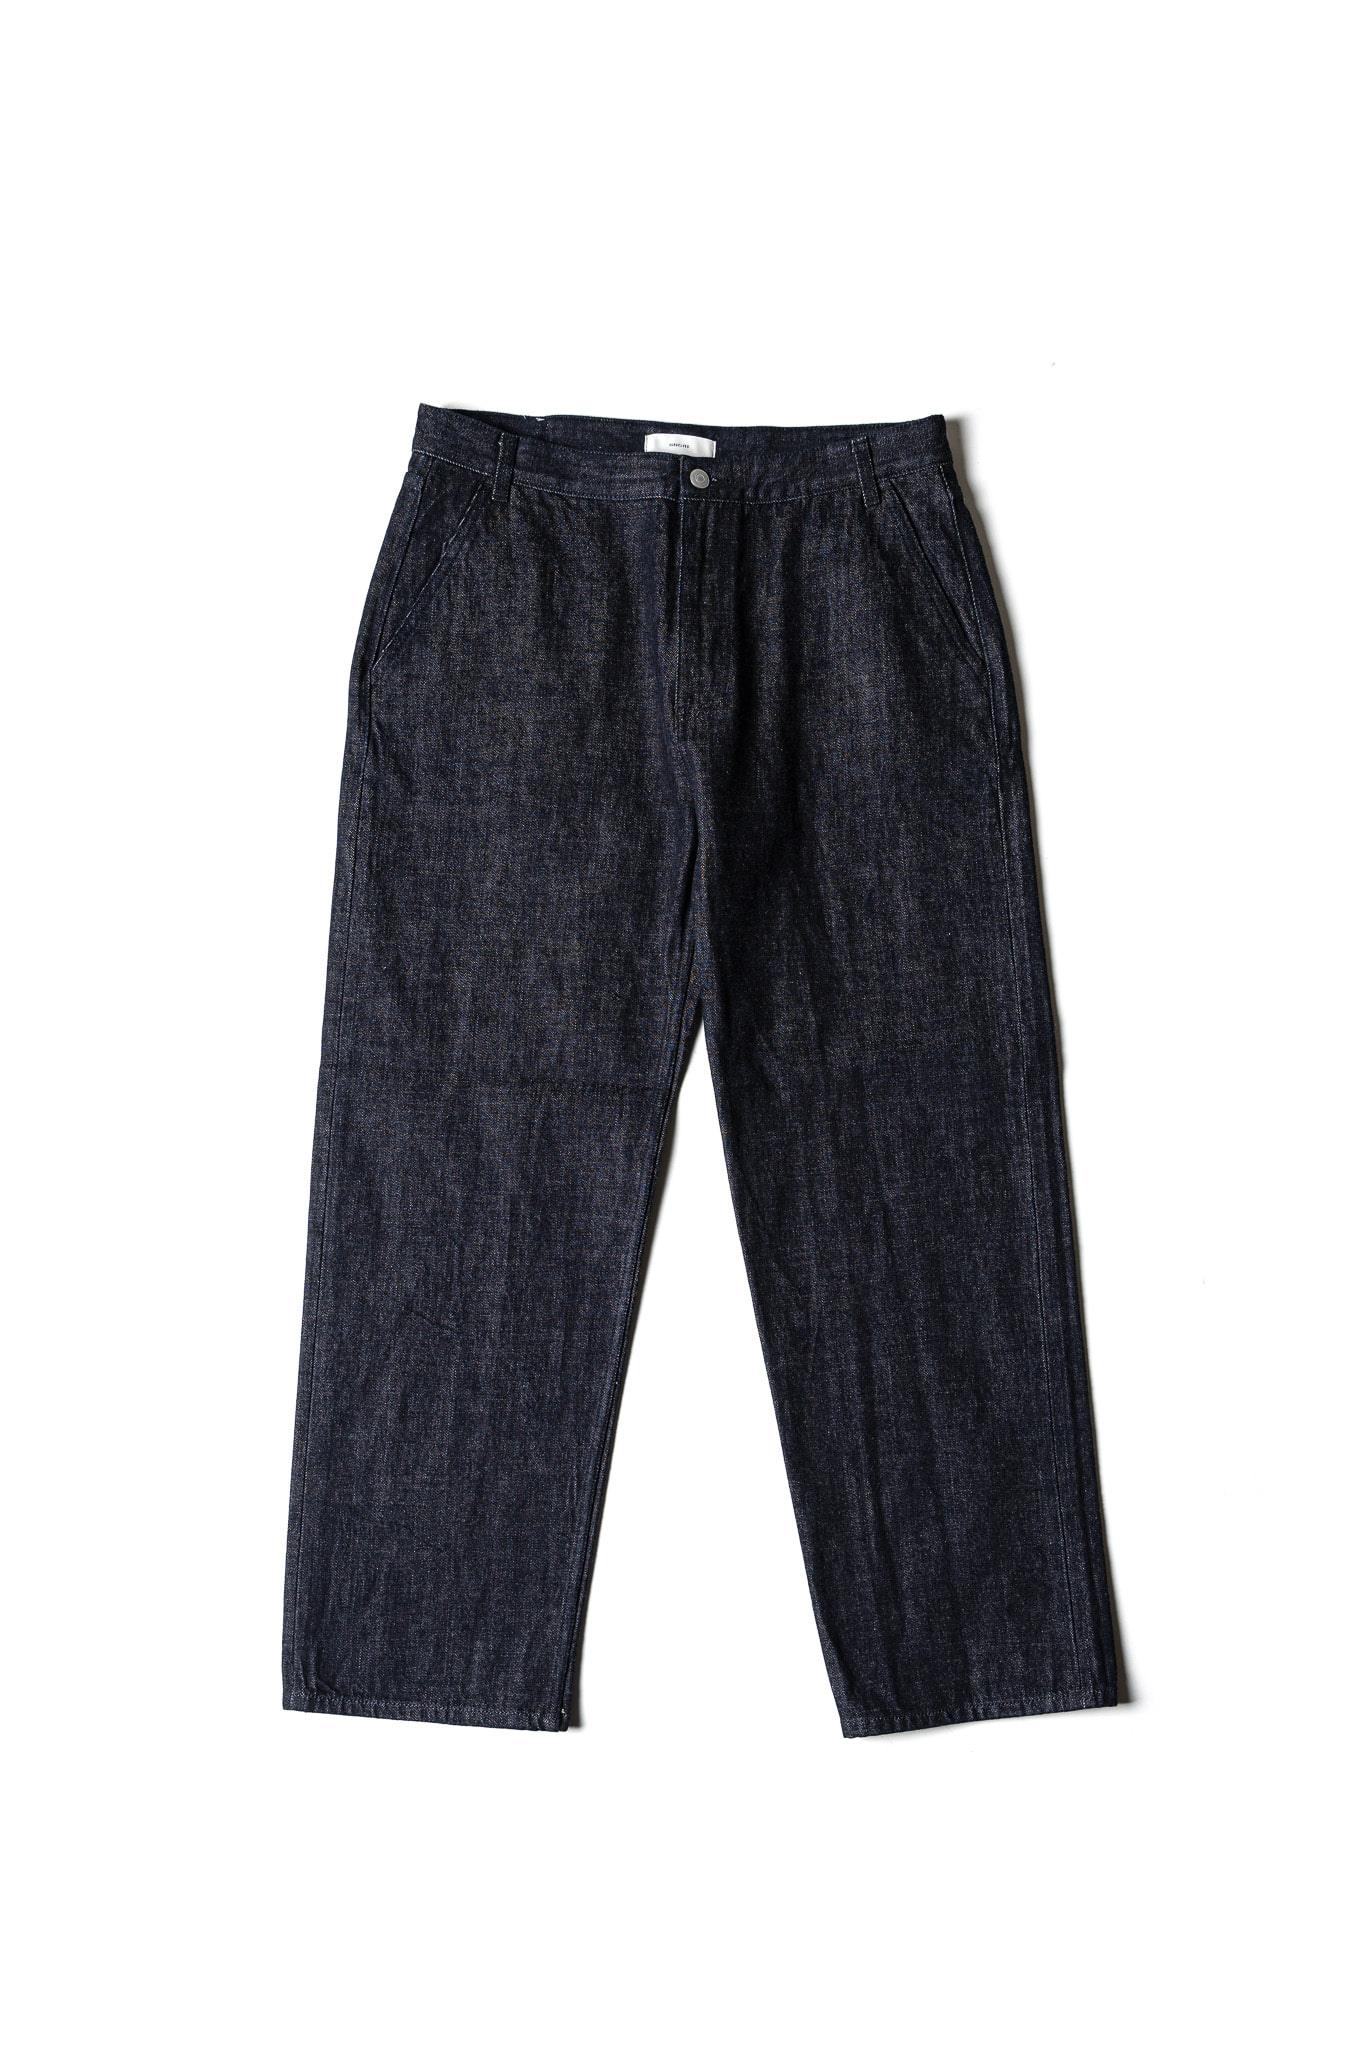 [23SS] ORGANIC COTTON RELAXED DENIM PANTS - ONE WASH SELVADGE